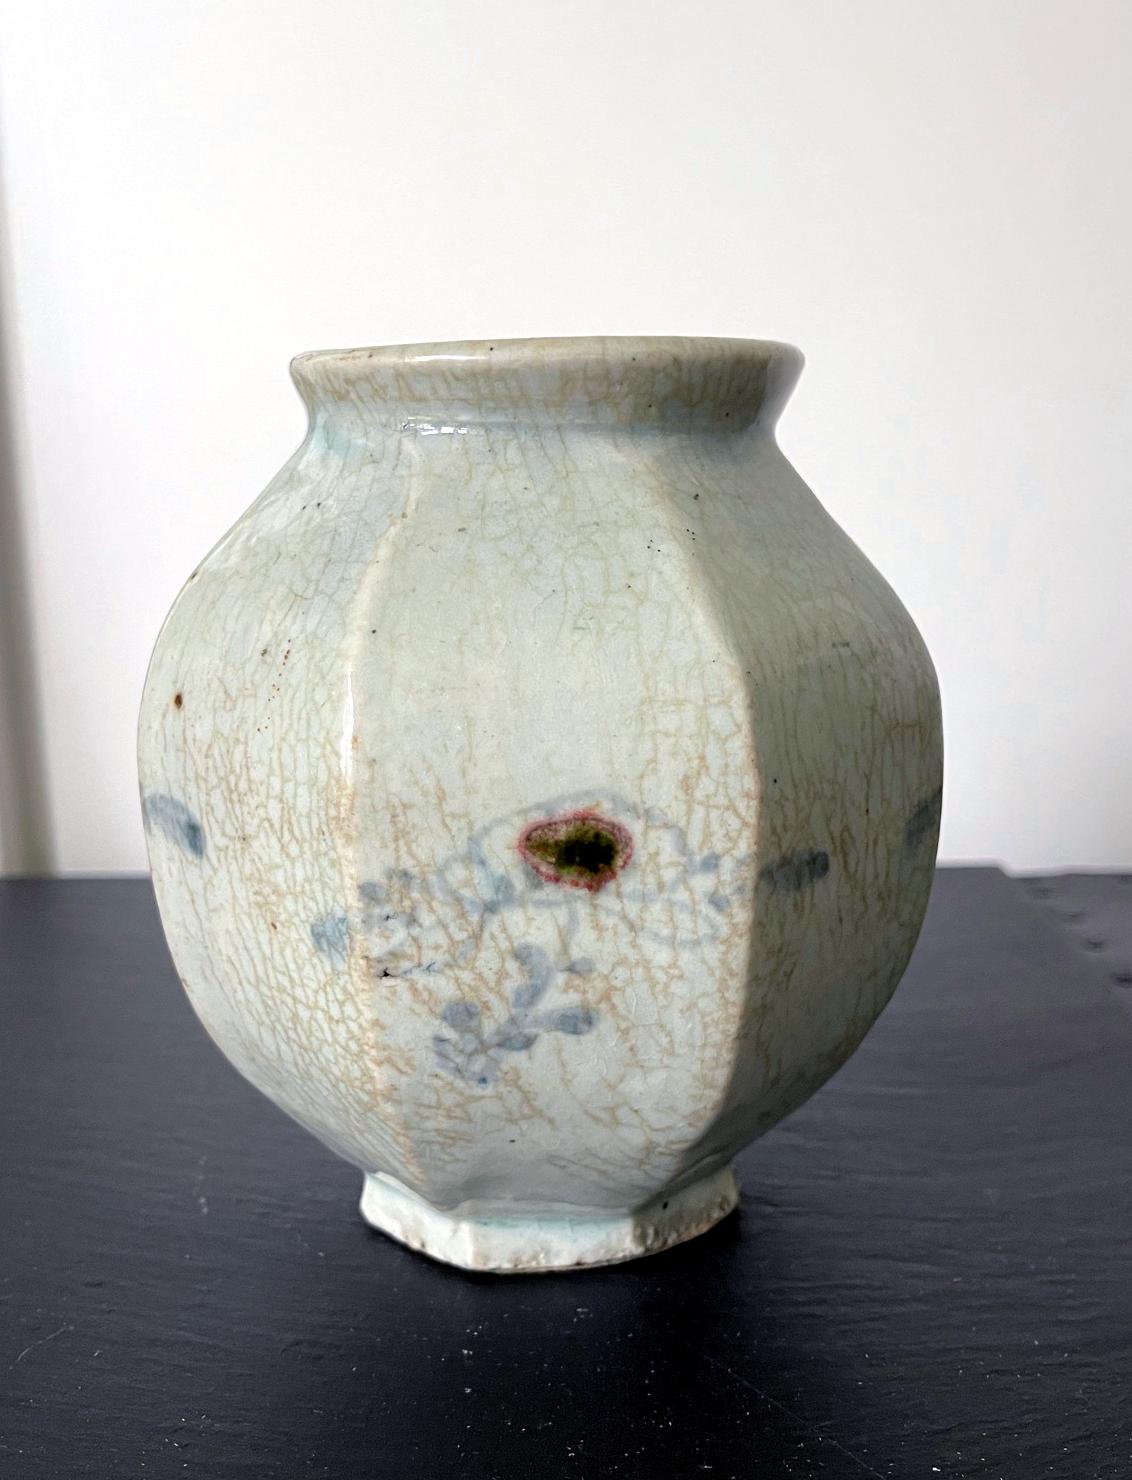 A small ceramic celadon storage jar circa 18th century of Korean Joseon Dynasty. The melon shape jar with a mouth and base of the same size display a beautiful harmony in its form. The body showcases an octagon facet with vigorous lines and angles.